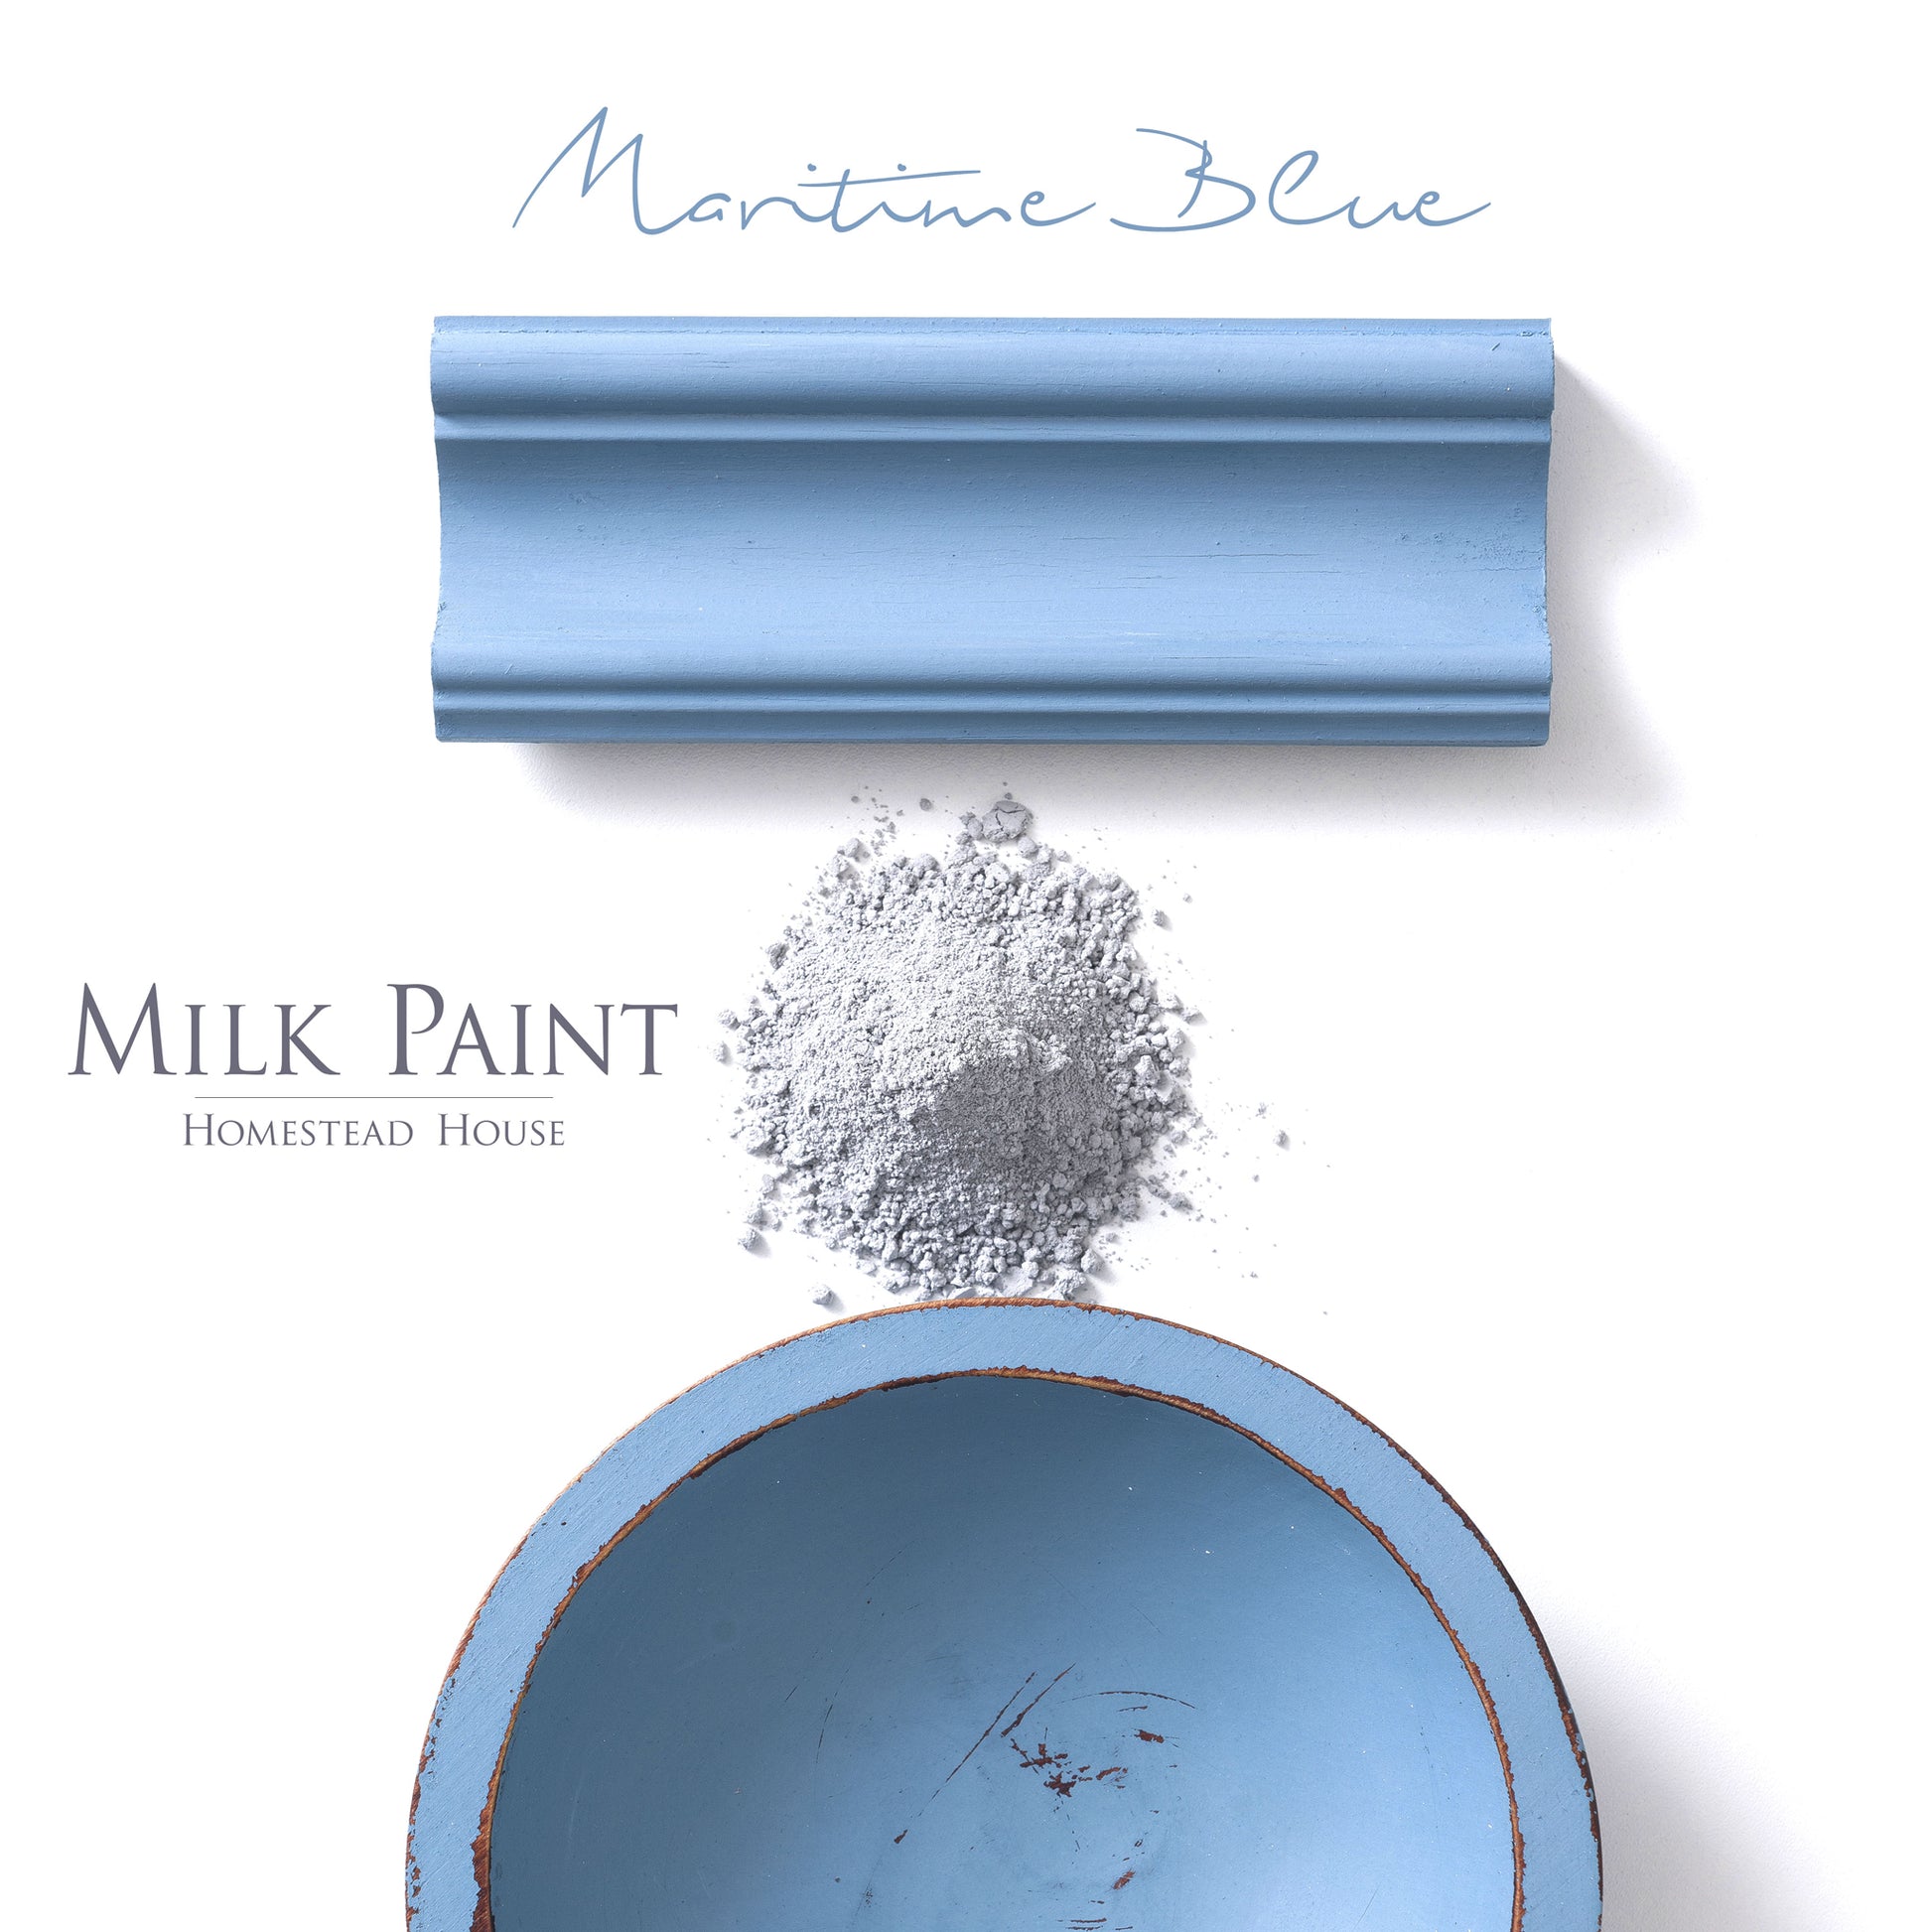 Milk Paint from Homestead House in Maritime Blue, a cheery bright blue with just a hint of lavender-grey.  |  homesteadhouse.ca